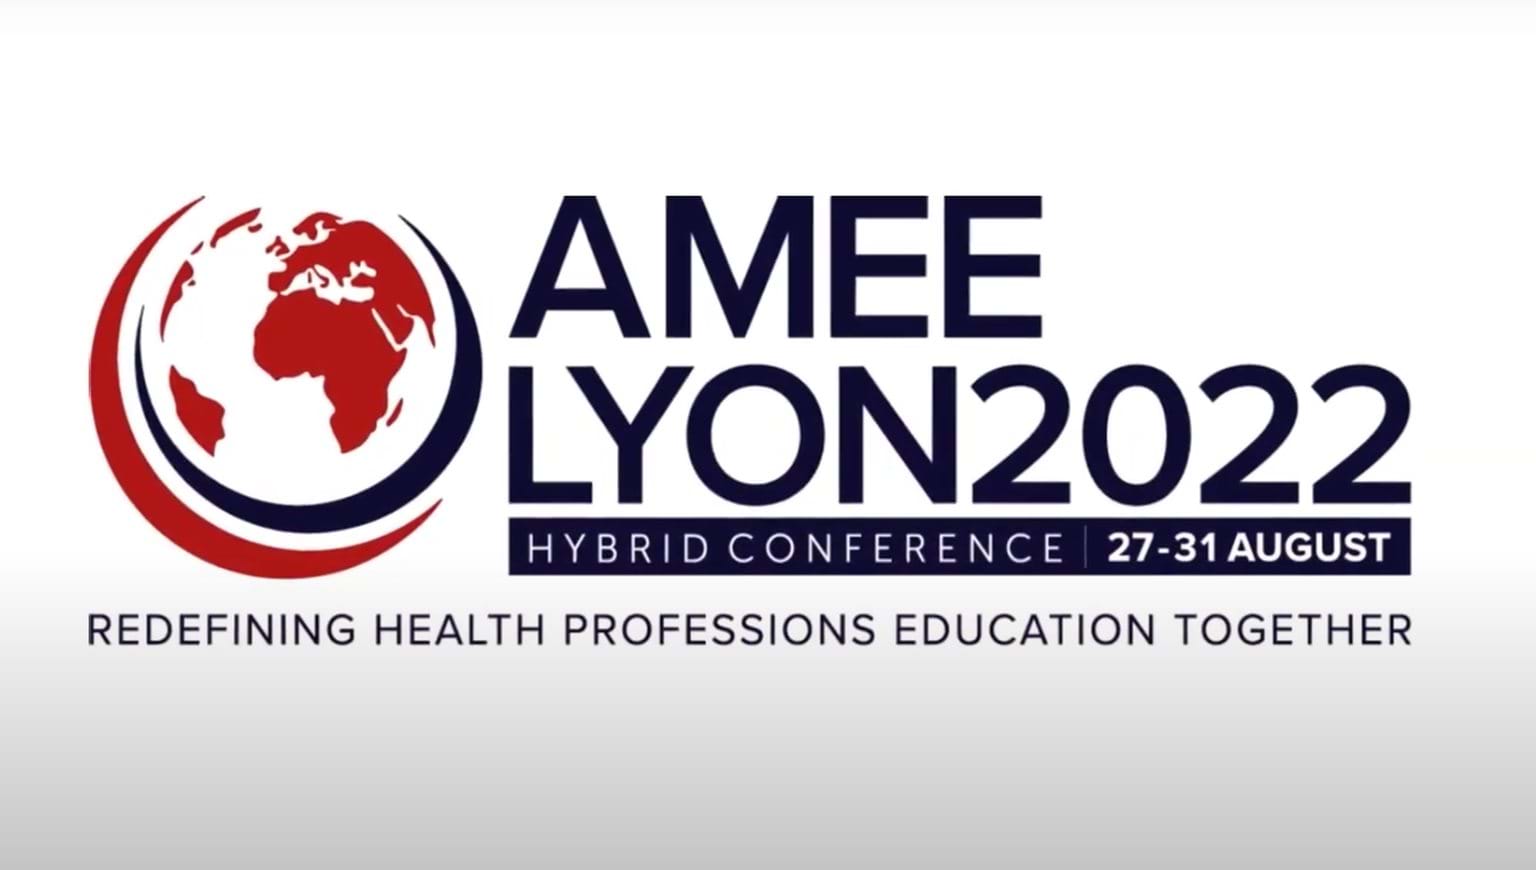 IVS will be exhibiting at AMEE 2022 Conference in Lyon, France